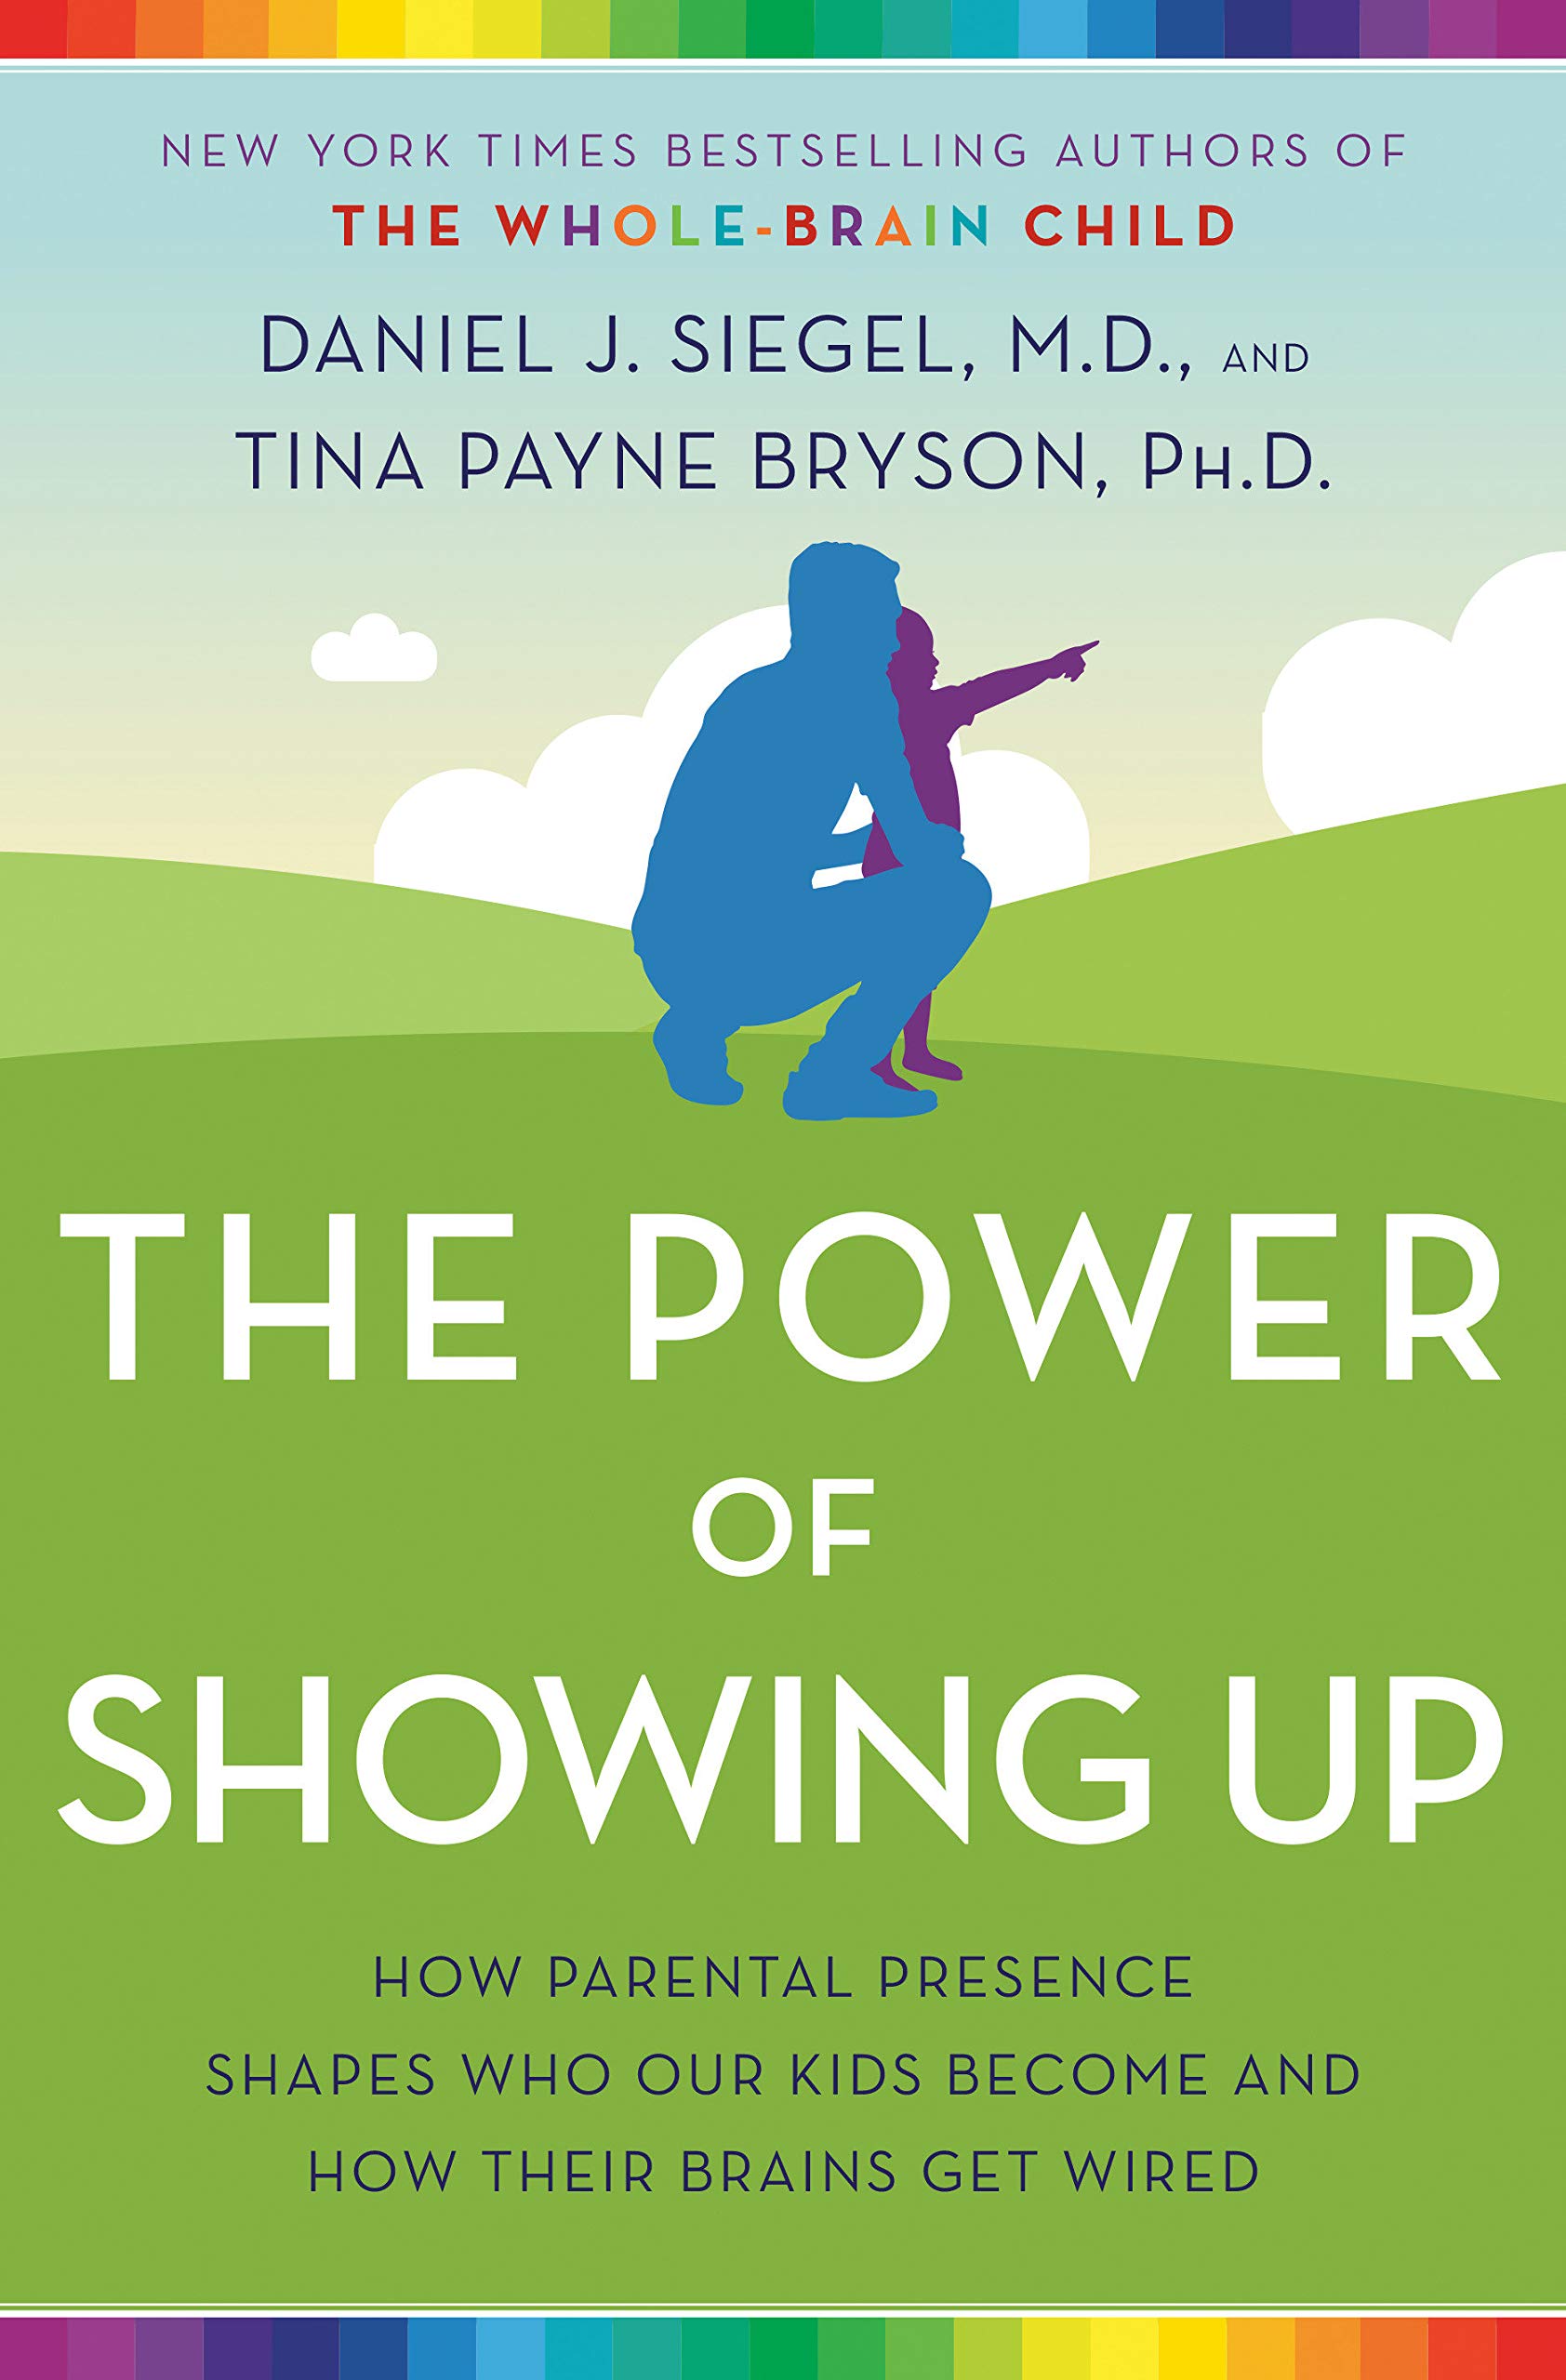 The Power of Showing Up: How Parental Presence Shapes Who Our Kids Become and How Their Brain Gets Wired – Daniel J. Siegel, M.D., & Tina Payne Bryson, PhD